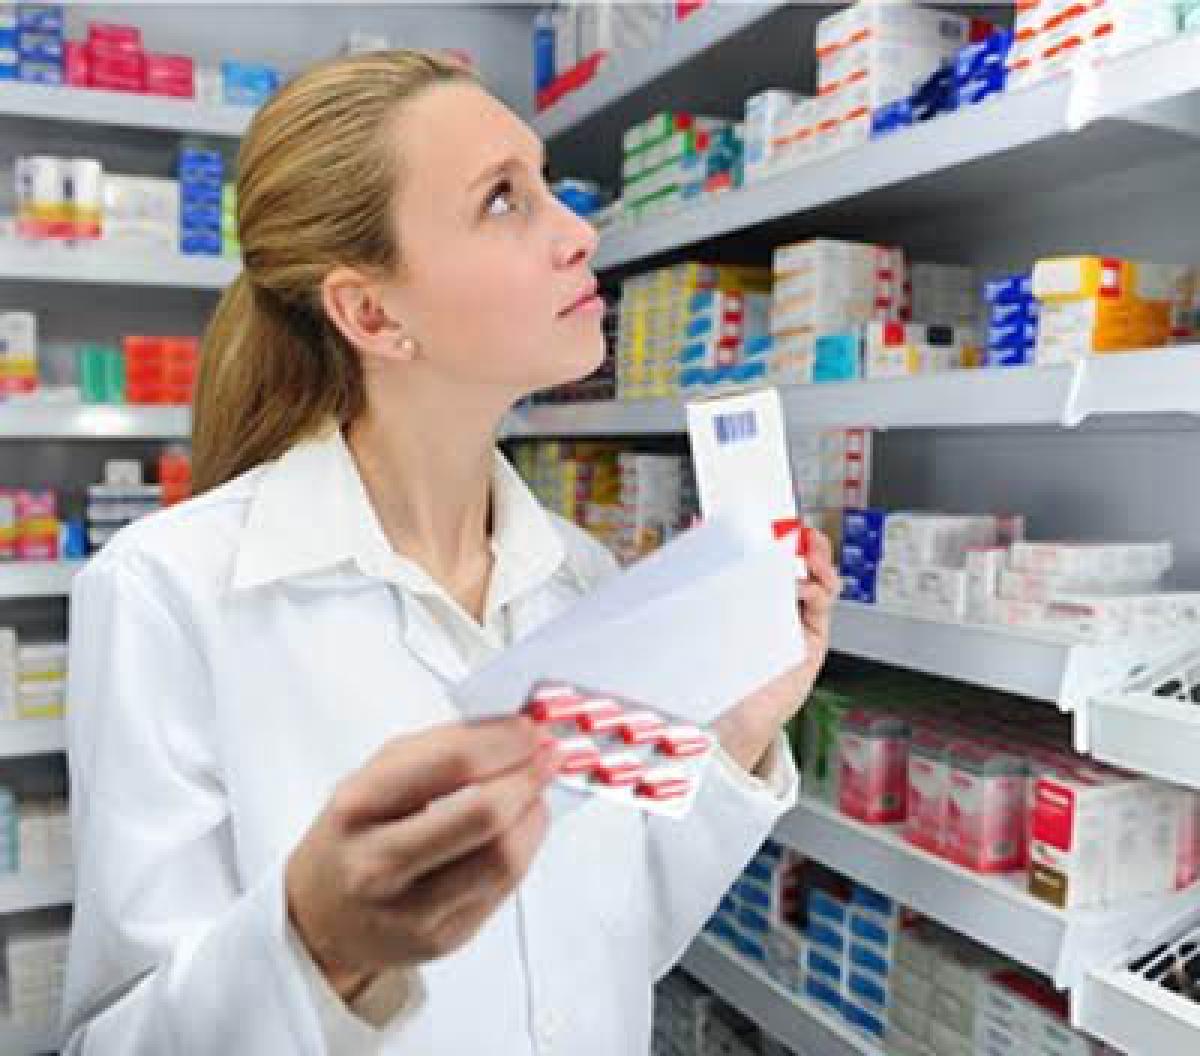 Southern India Dominates the Overall Sales of Pharmacy Retail Products in India – Ken Research